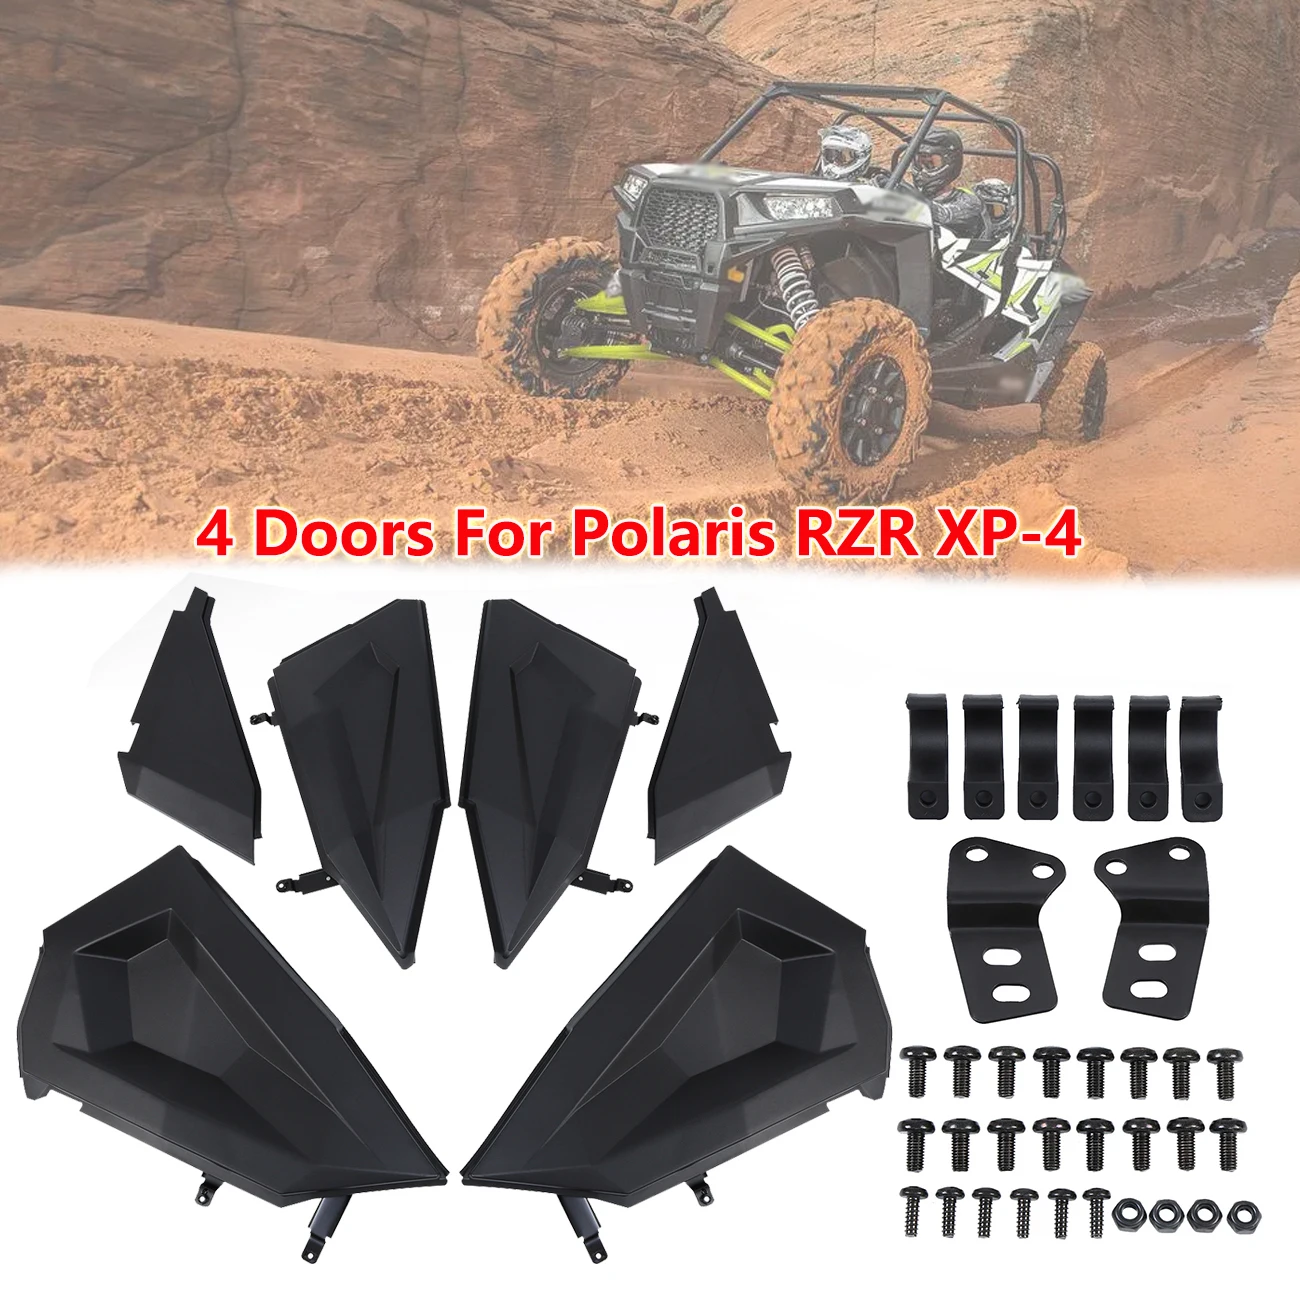 

Samger Black Lower Door Panel Inserts Easy To Install w/ Metal Frame For Polaris RZR 900 1000 XP S Turbo 2014-2020